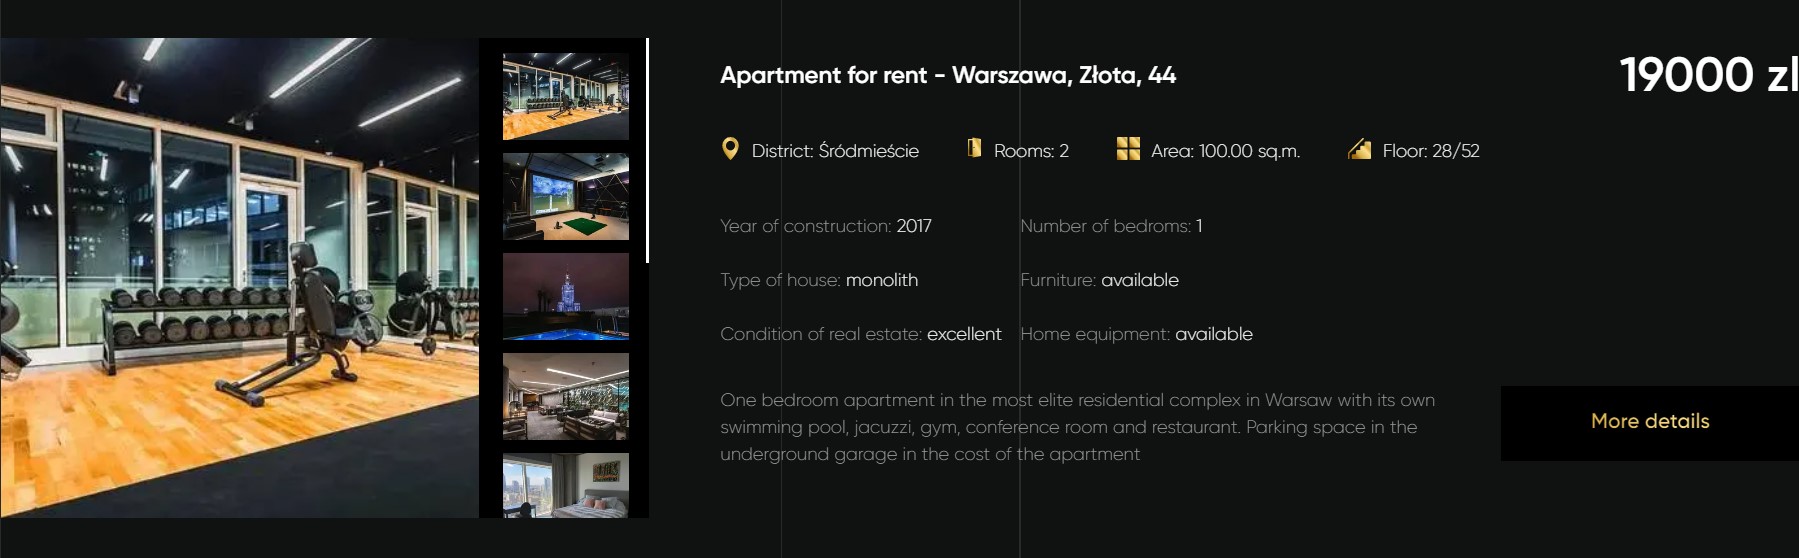 Announcement of renting an apartment